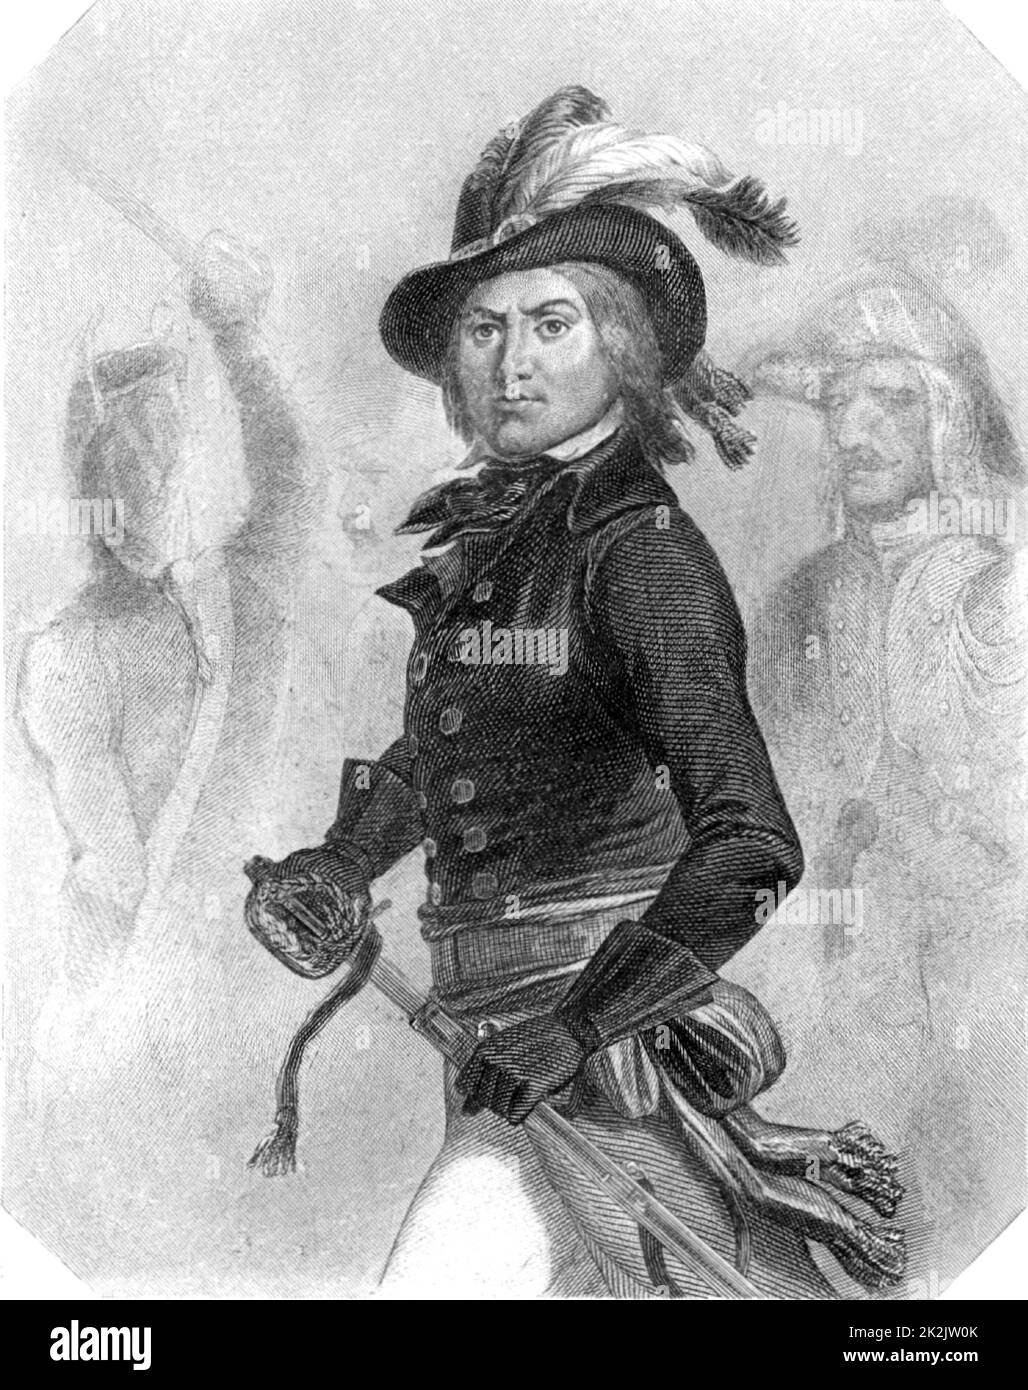 Paul Jean Francois Nicolas, vicomte de Barras (1755-1829) French revolutionary. Especially cruel and ruthless. One of the five members of the Directoire (1795). Exiled after Napoleon's coup of 18 Brumaire (9 November 1799). Engraving. Stock Photo